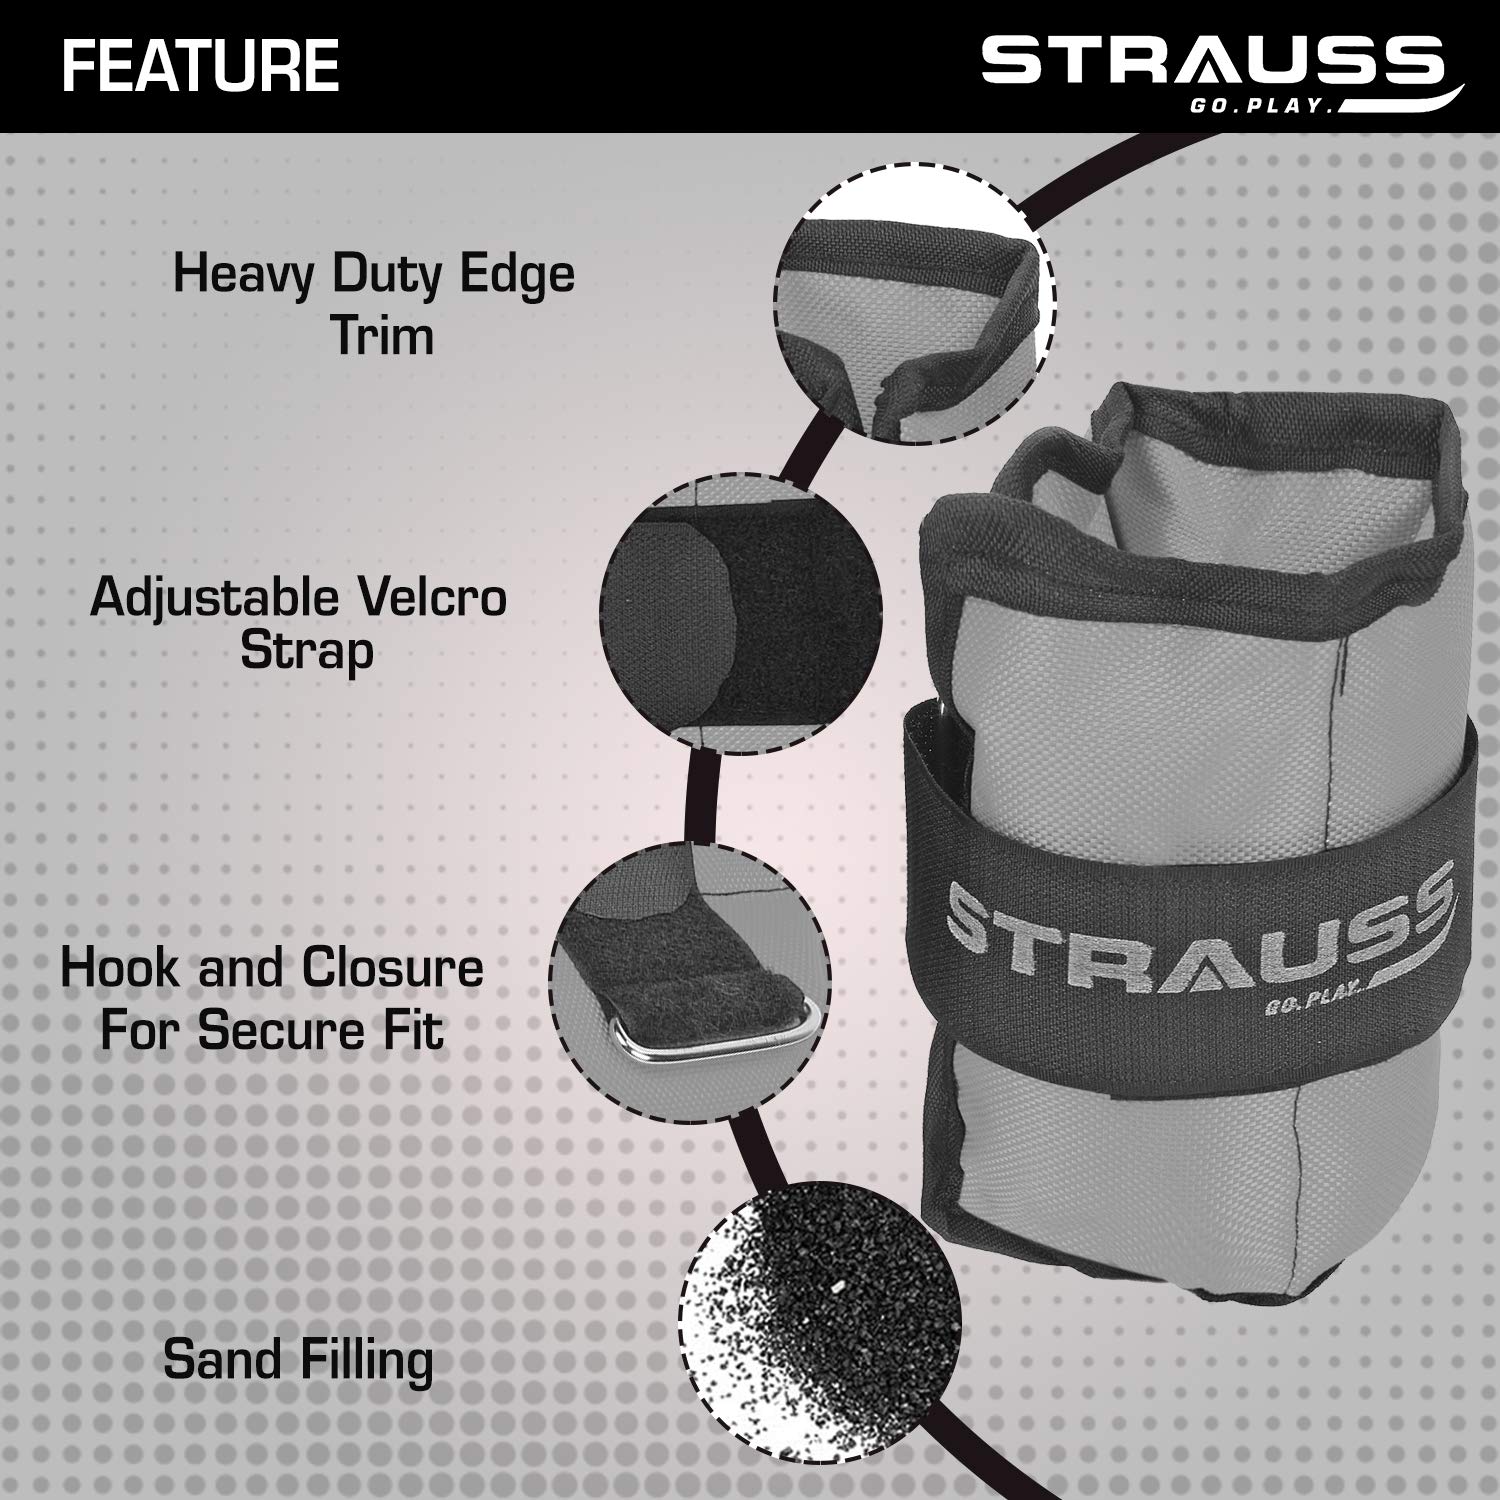 Strauss Adjustable Ankle/Wrist Weights 1.5 KG X 2 | Ideal for Walking, Running, Jogging, Cycling, Gym, Workout & Strength Training | Easy to Use on Ankle, Wrist, Leg, (Grey)